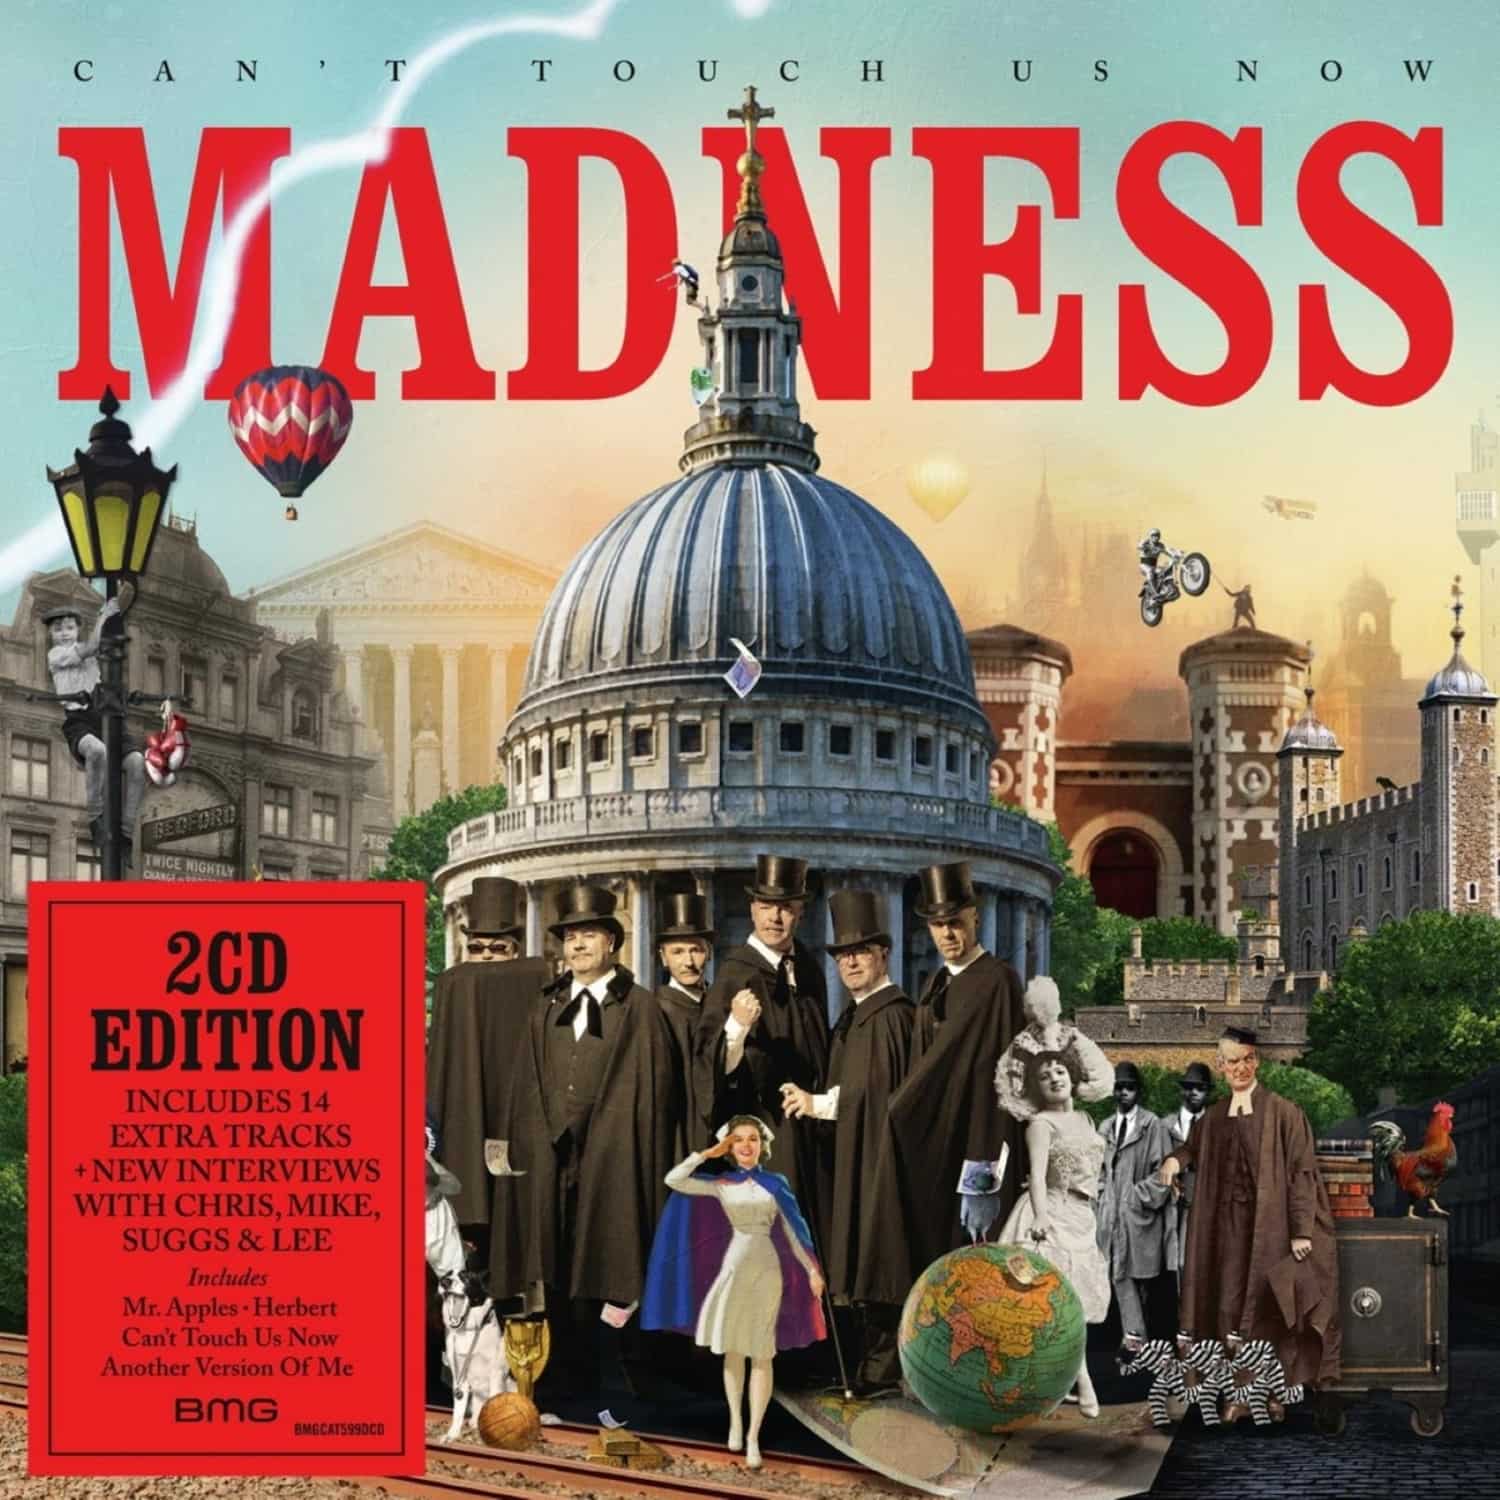 Madness - CAN T TOUCH US NOW 